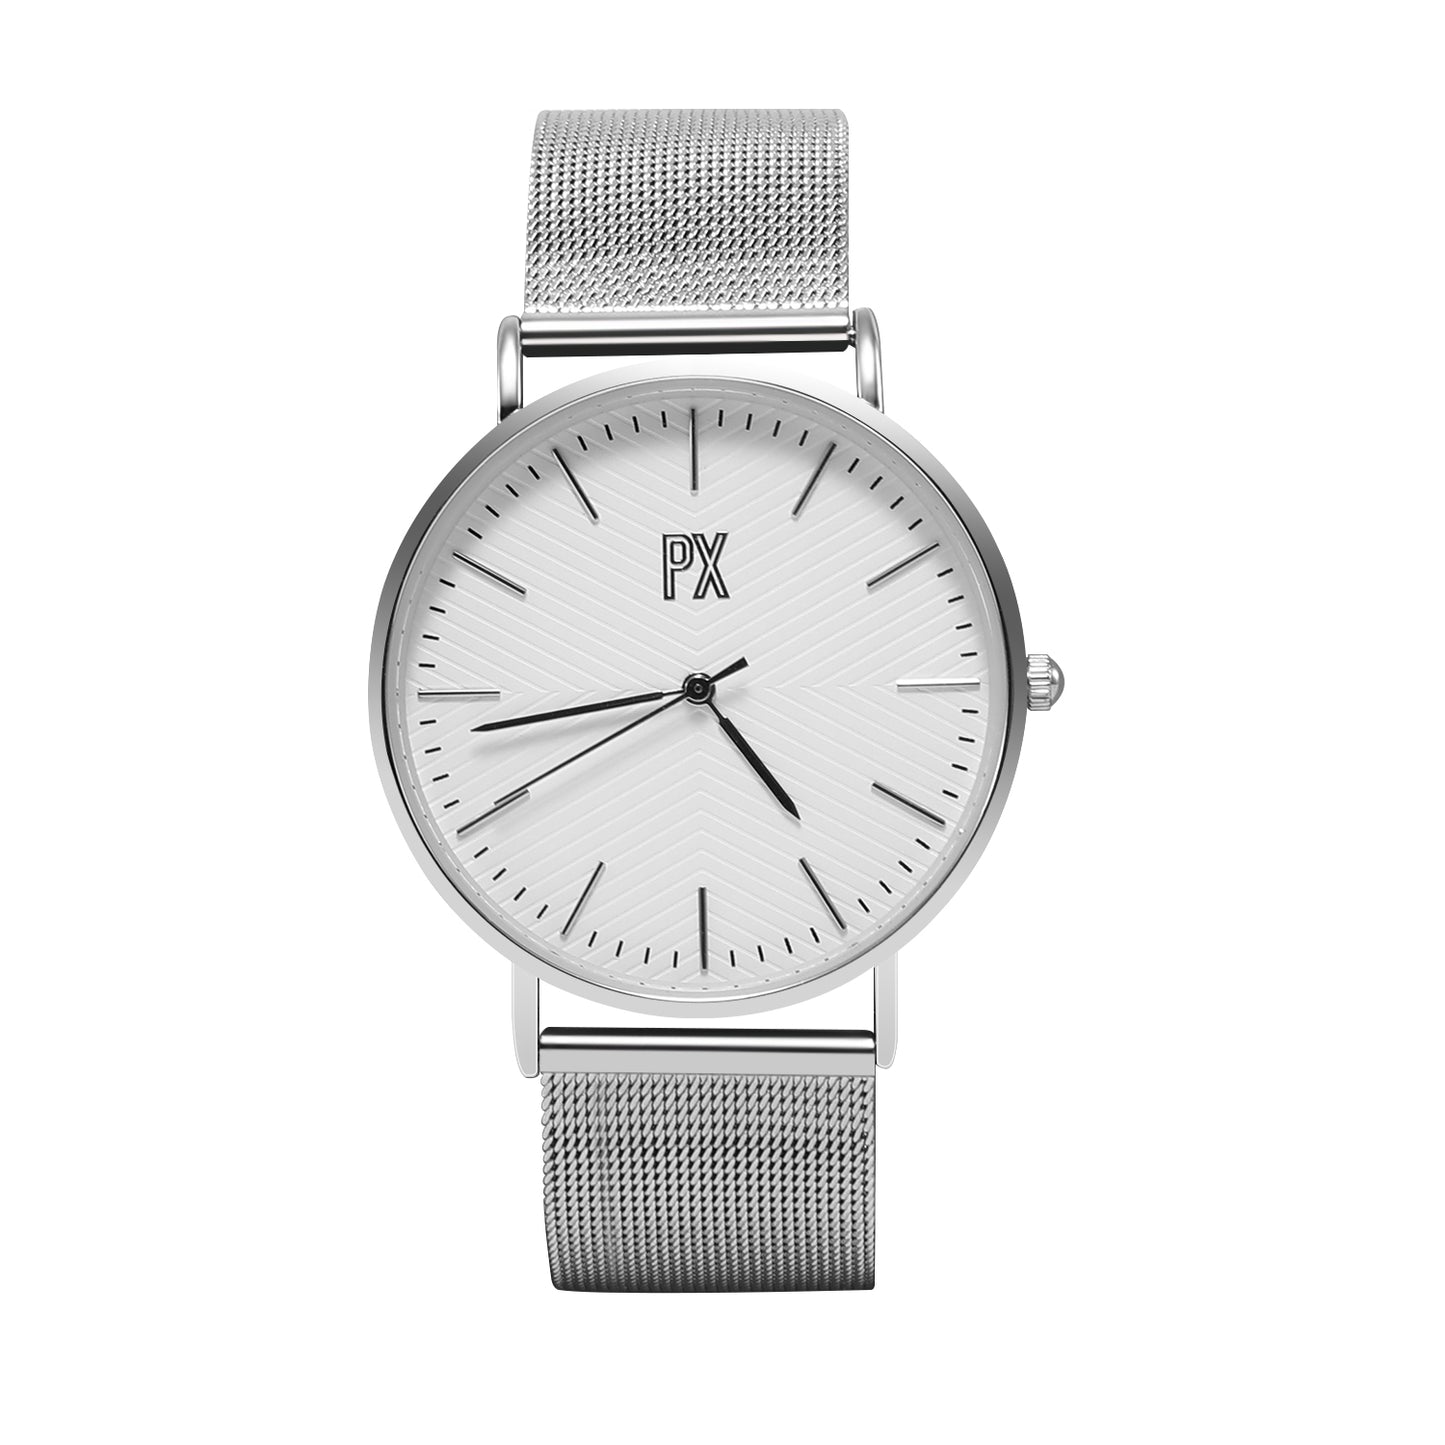 PX Silver Mesh Strap Watch with White Printed Face